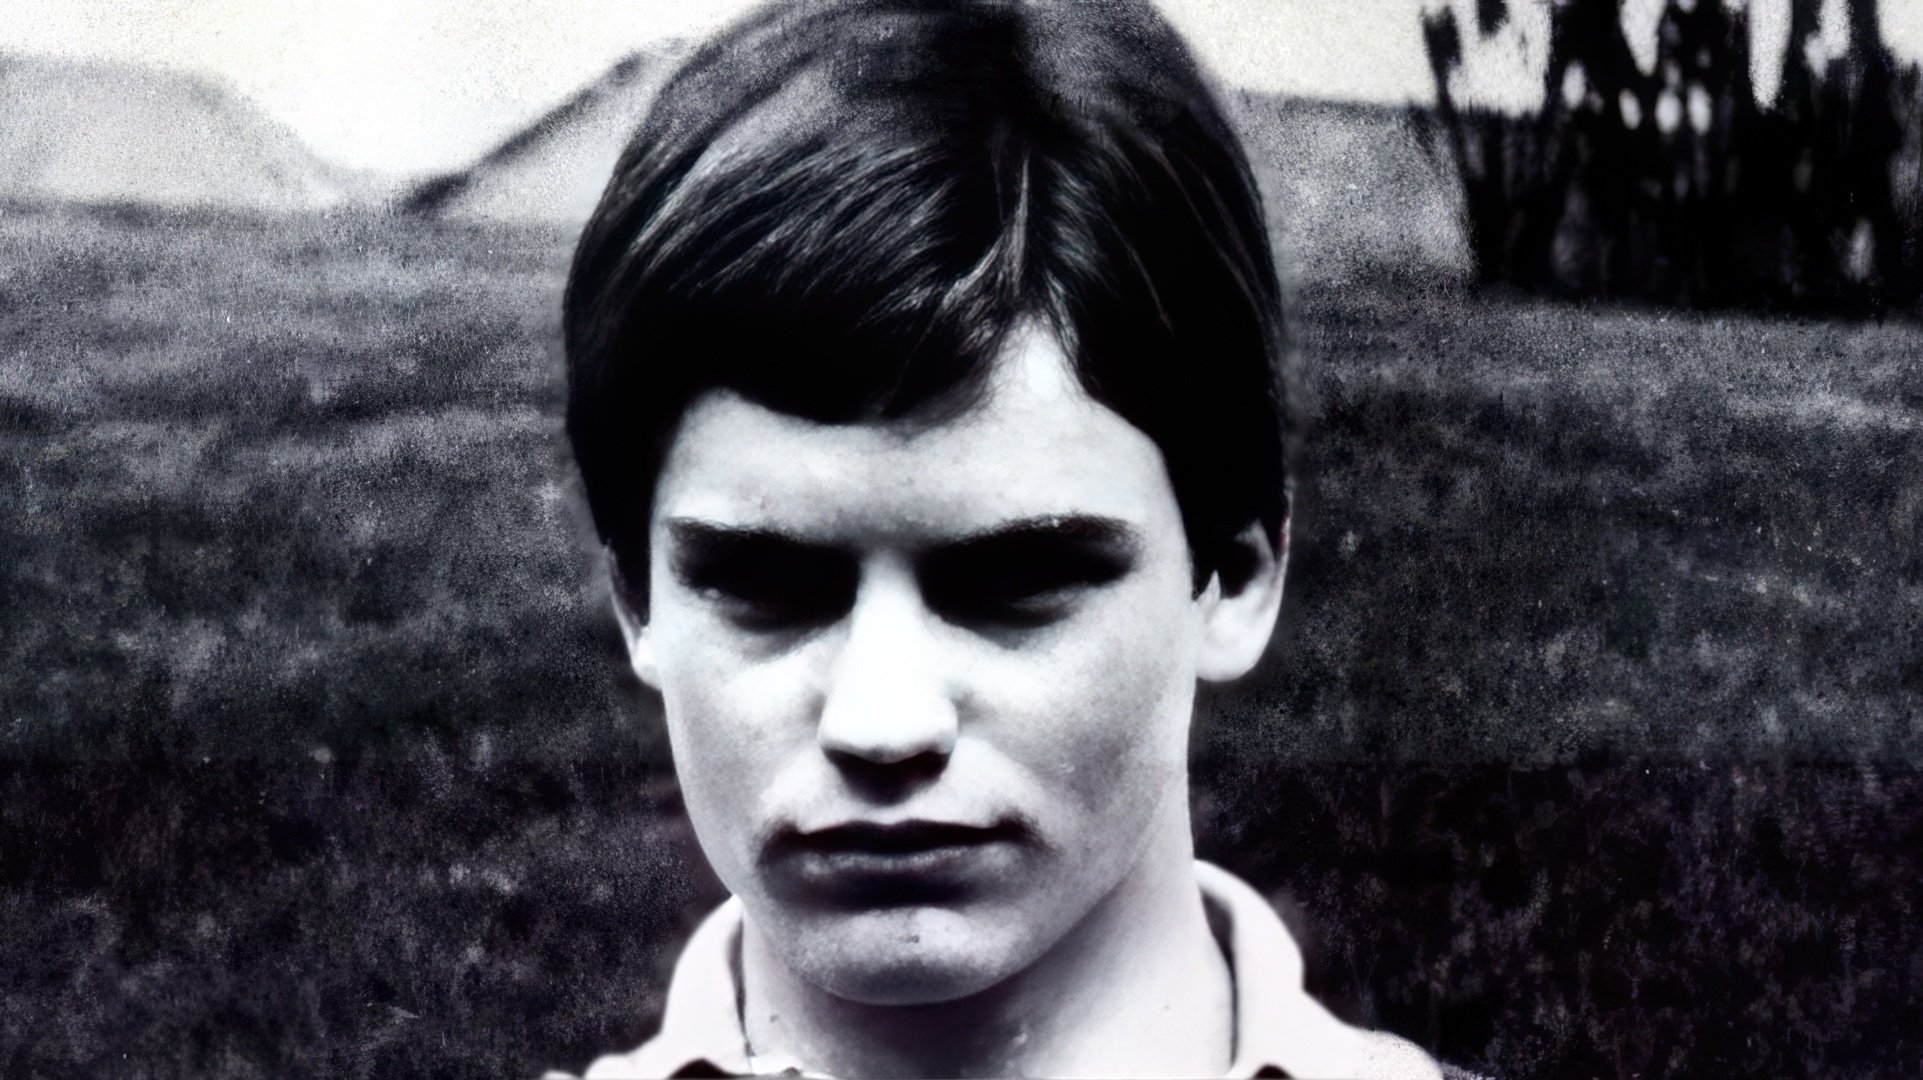 Sting in his youth